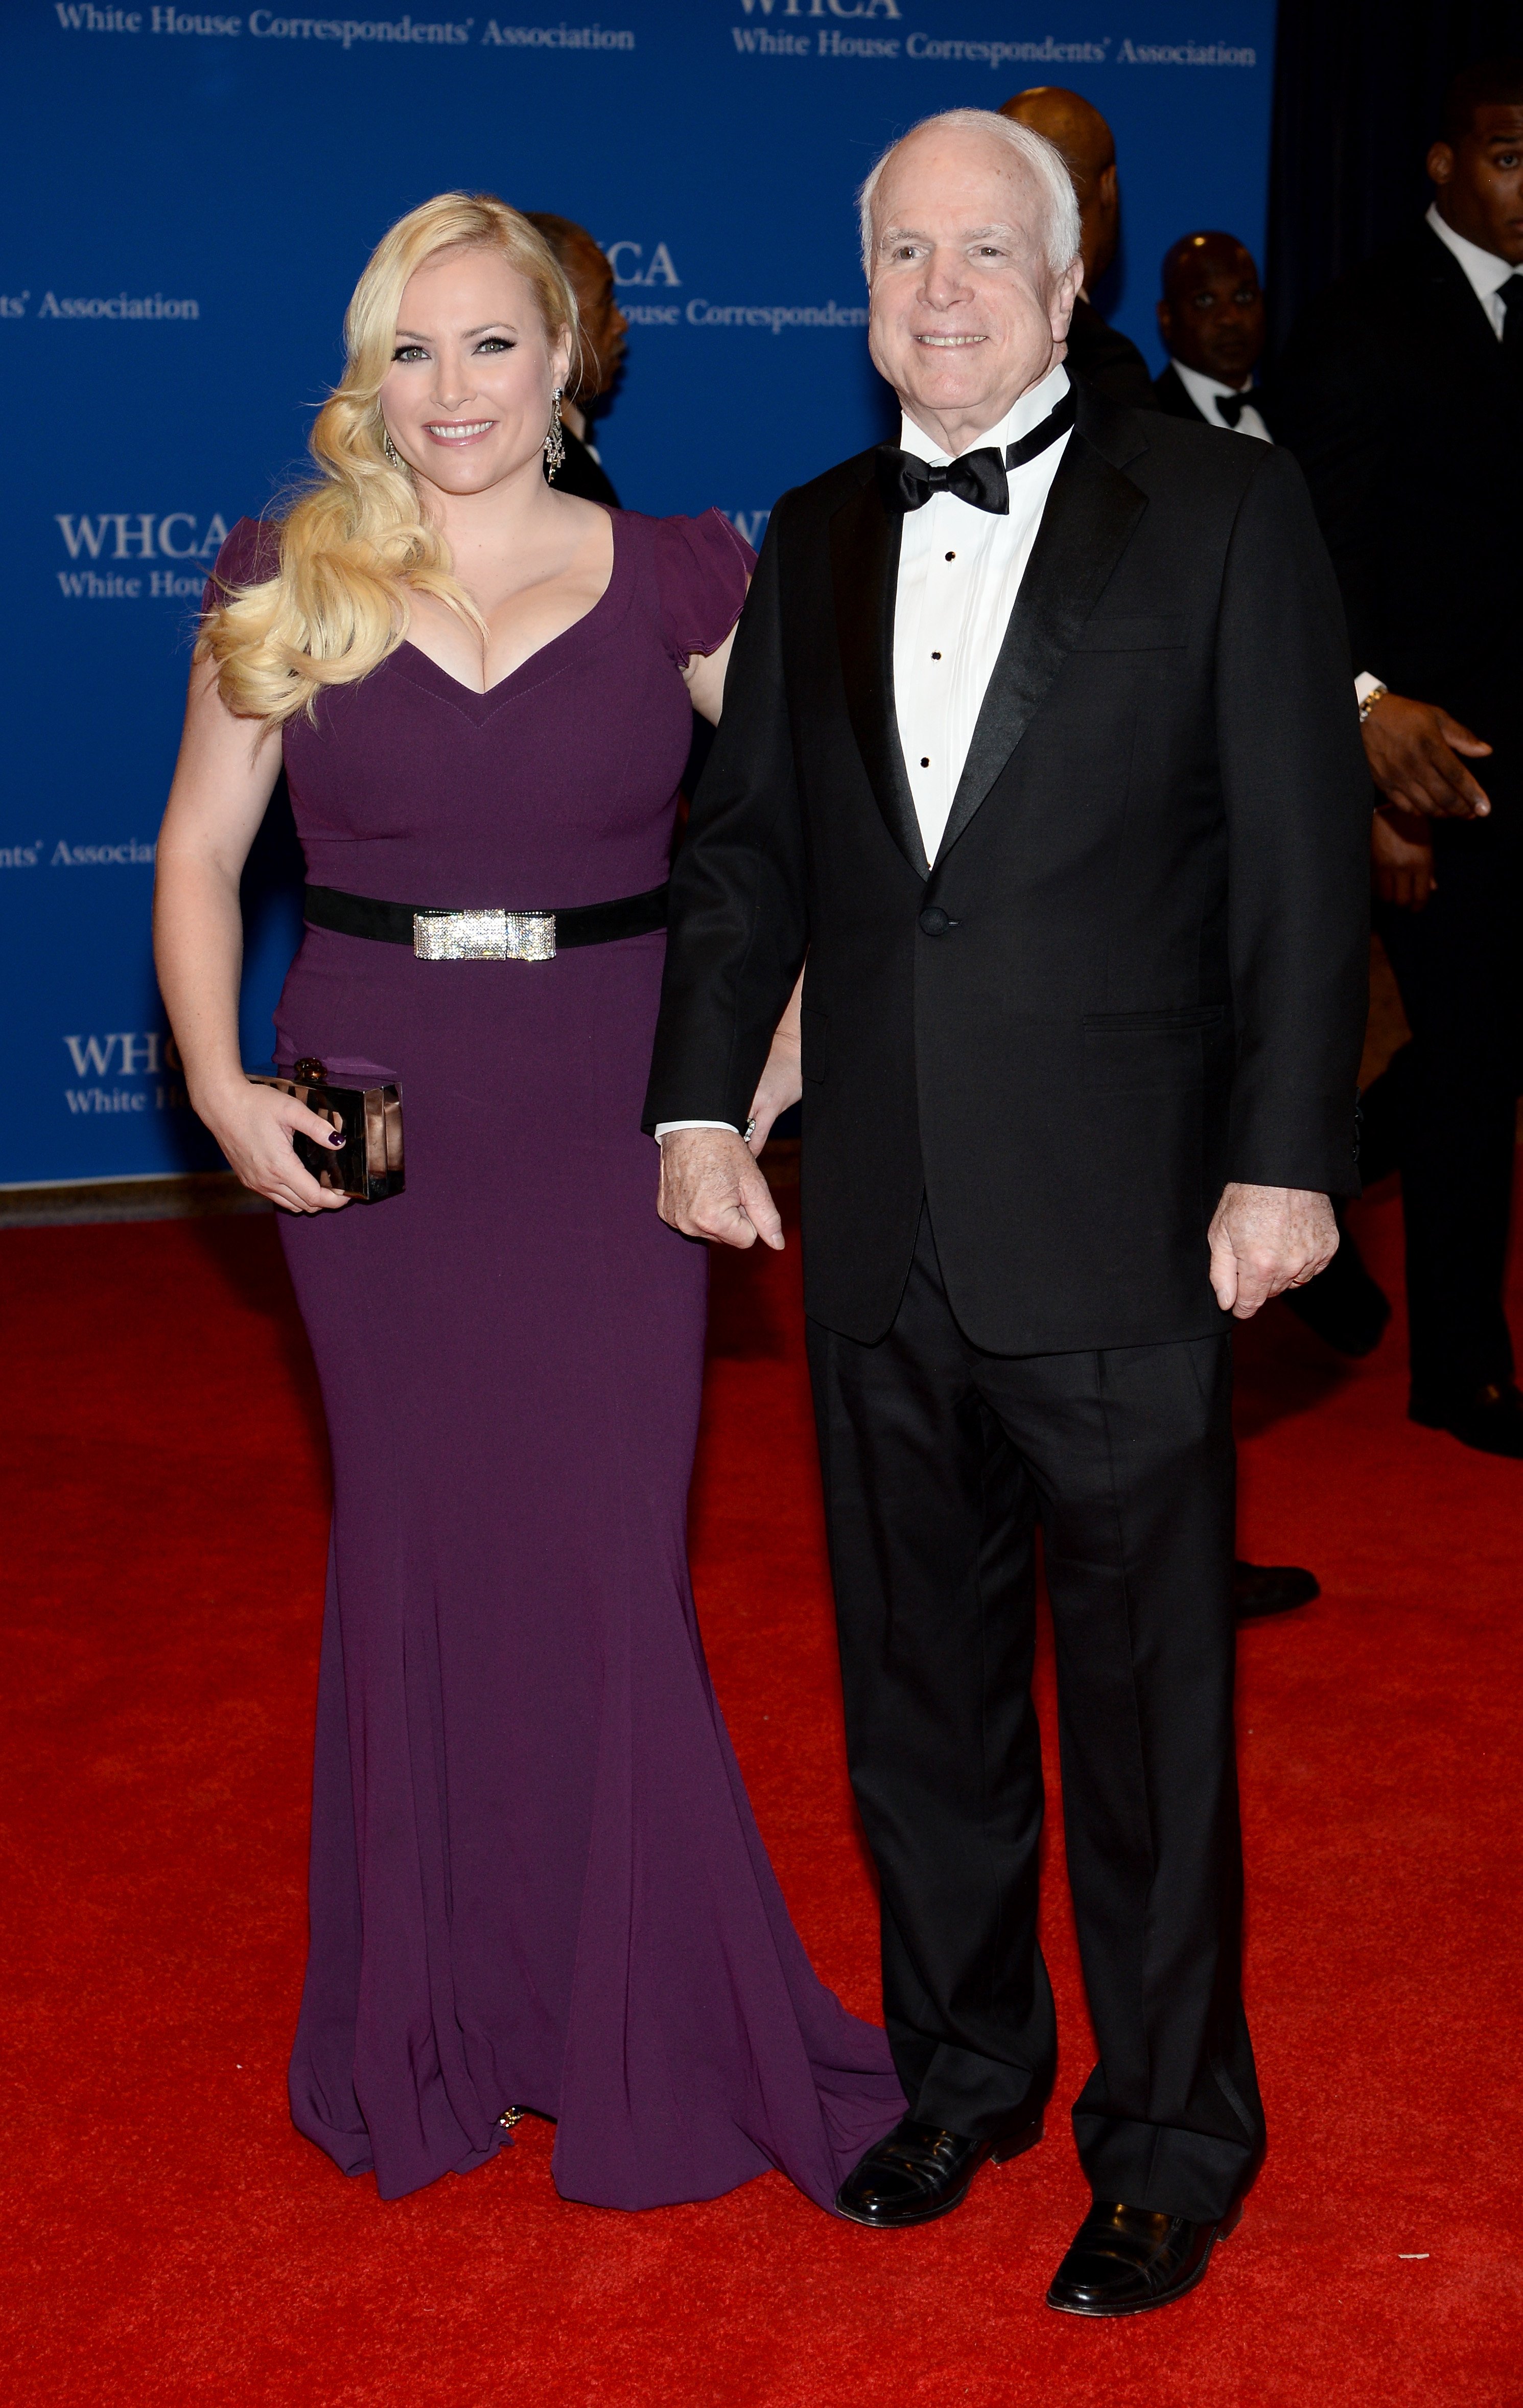 Megan McCain and Senator John McCain attend the 100th Annual White House Correspondents' Association Dinner on May 3, 2014, in Washington, DC. | Source: Getty Images.